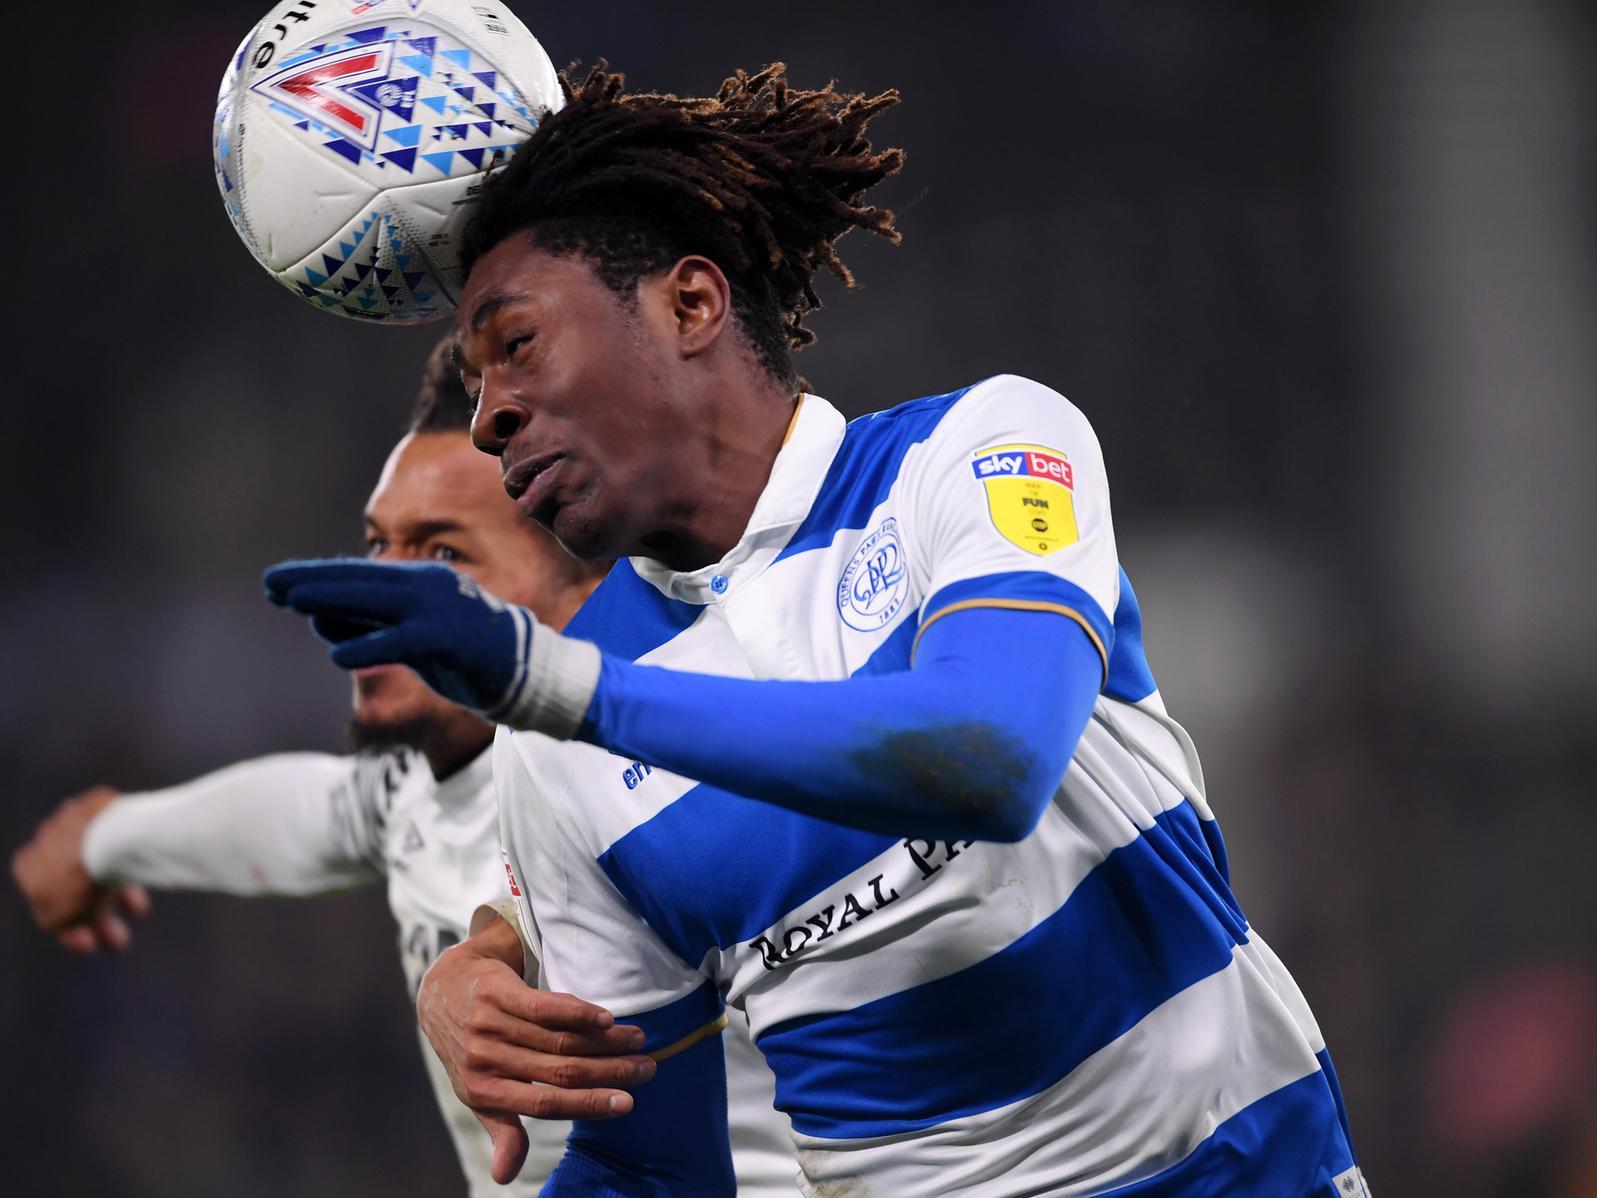 QPR could be set to hang on to their star midfielder Eberechi Eze until after the January transfer window, with Spurs' sacking of Mauricio Pochettino said to have halted their interest in the player. (Daily Mail)